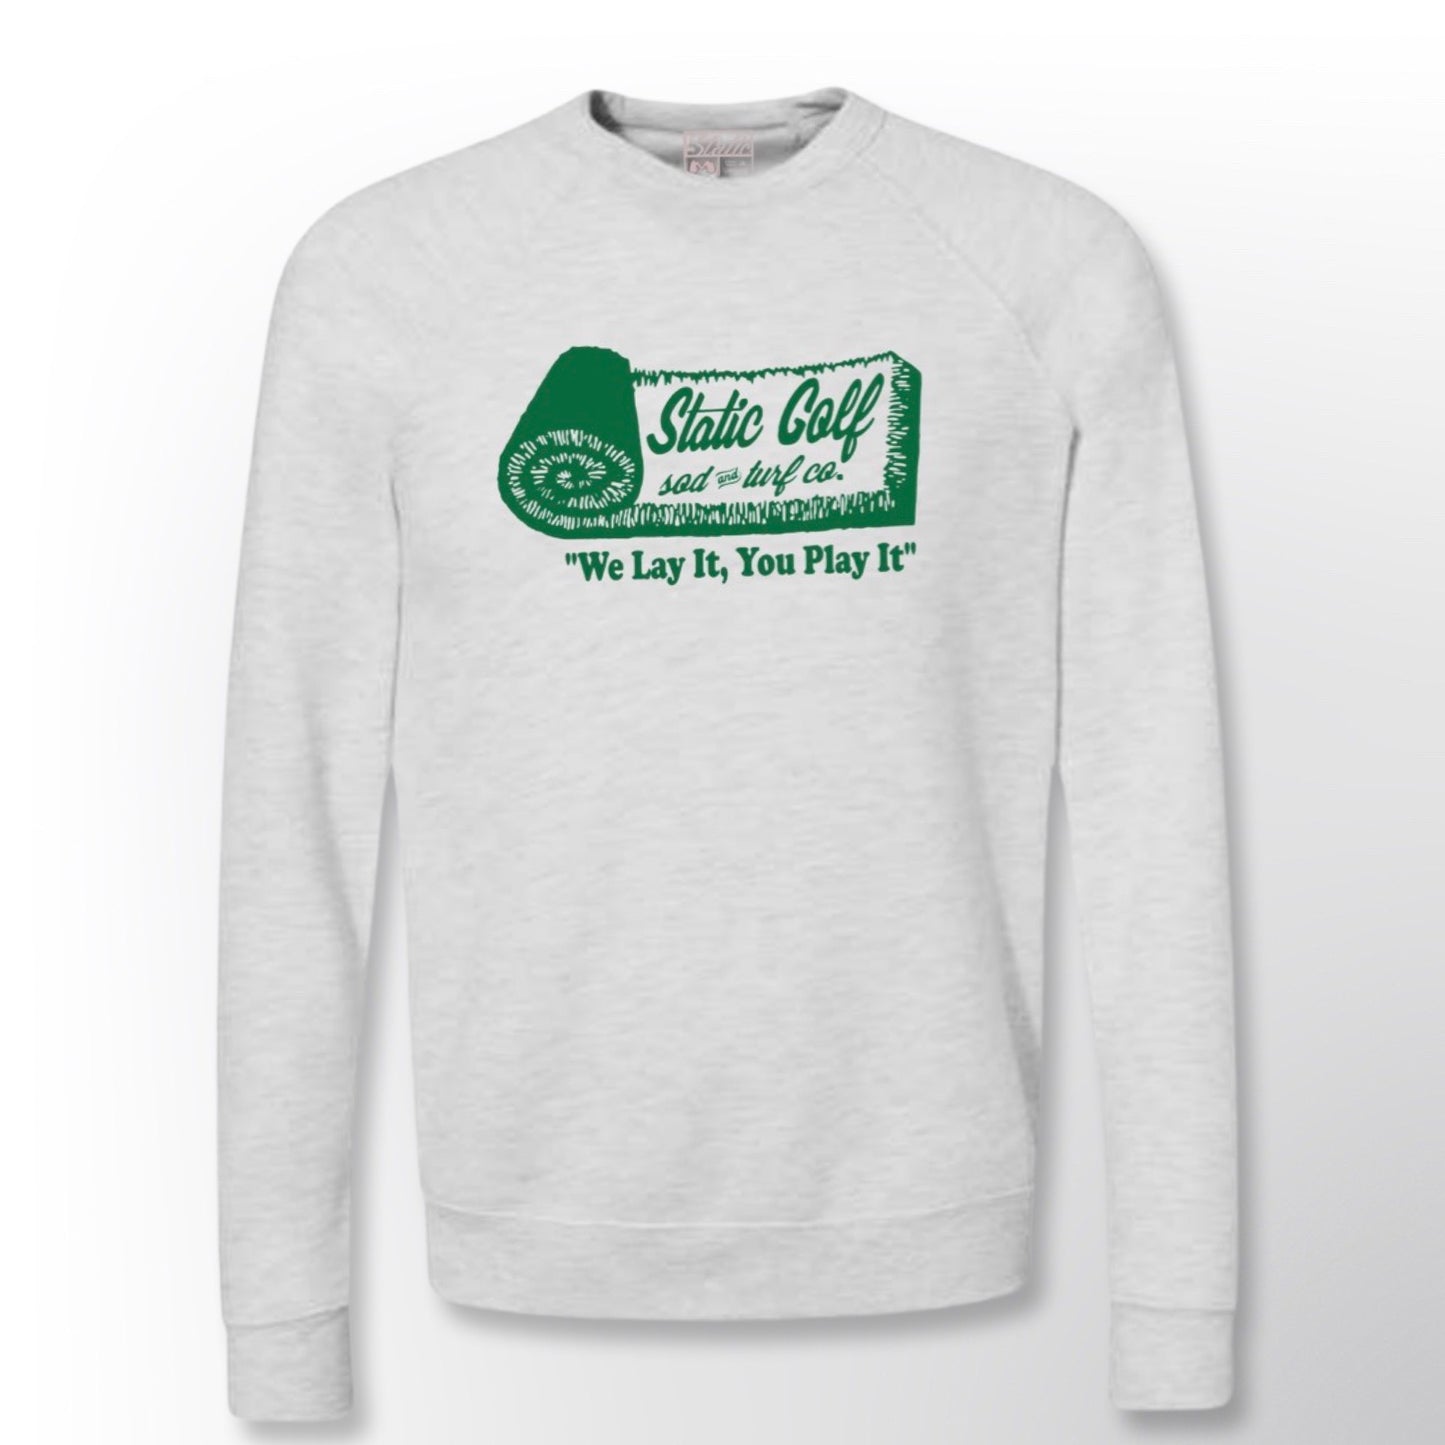 SOD AND TURF - CREW NECK